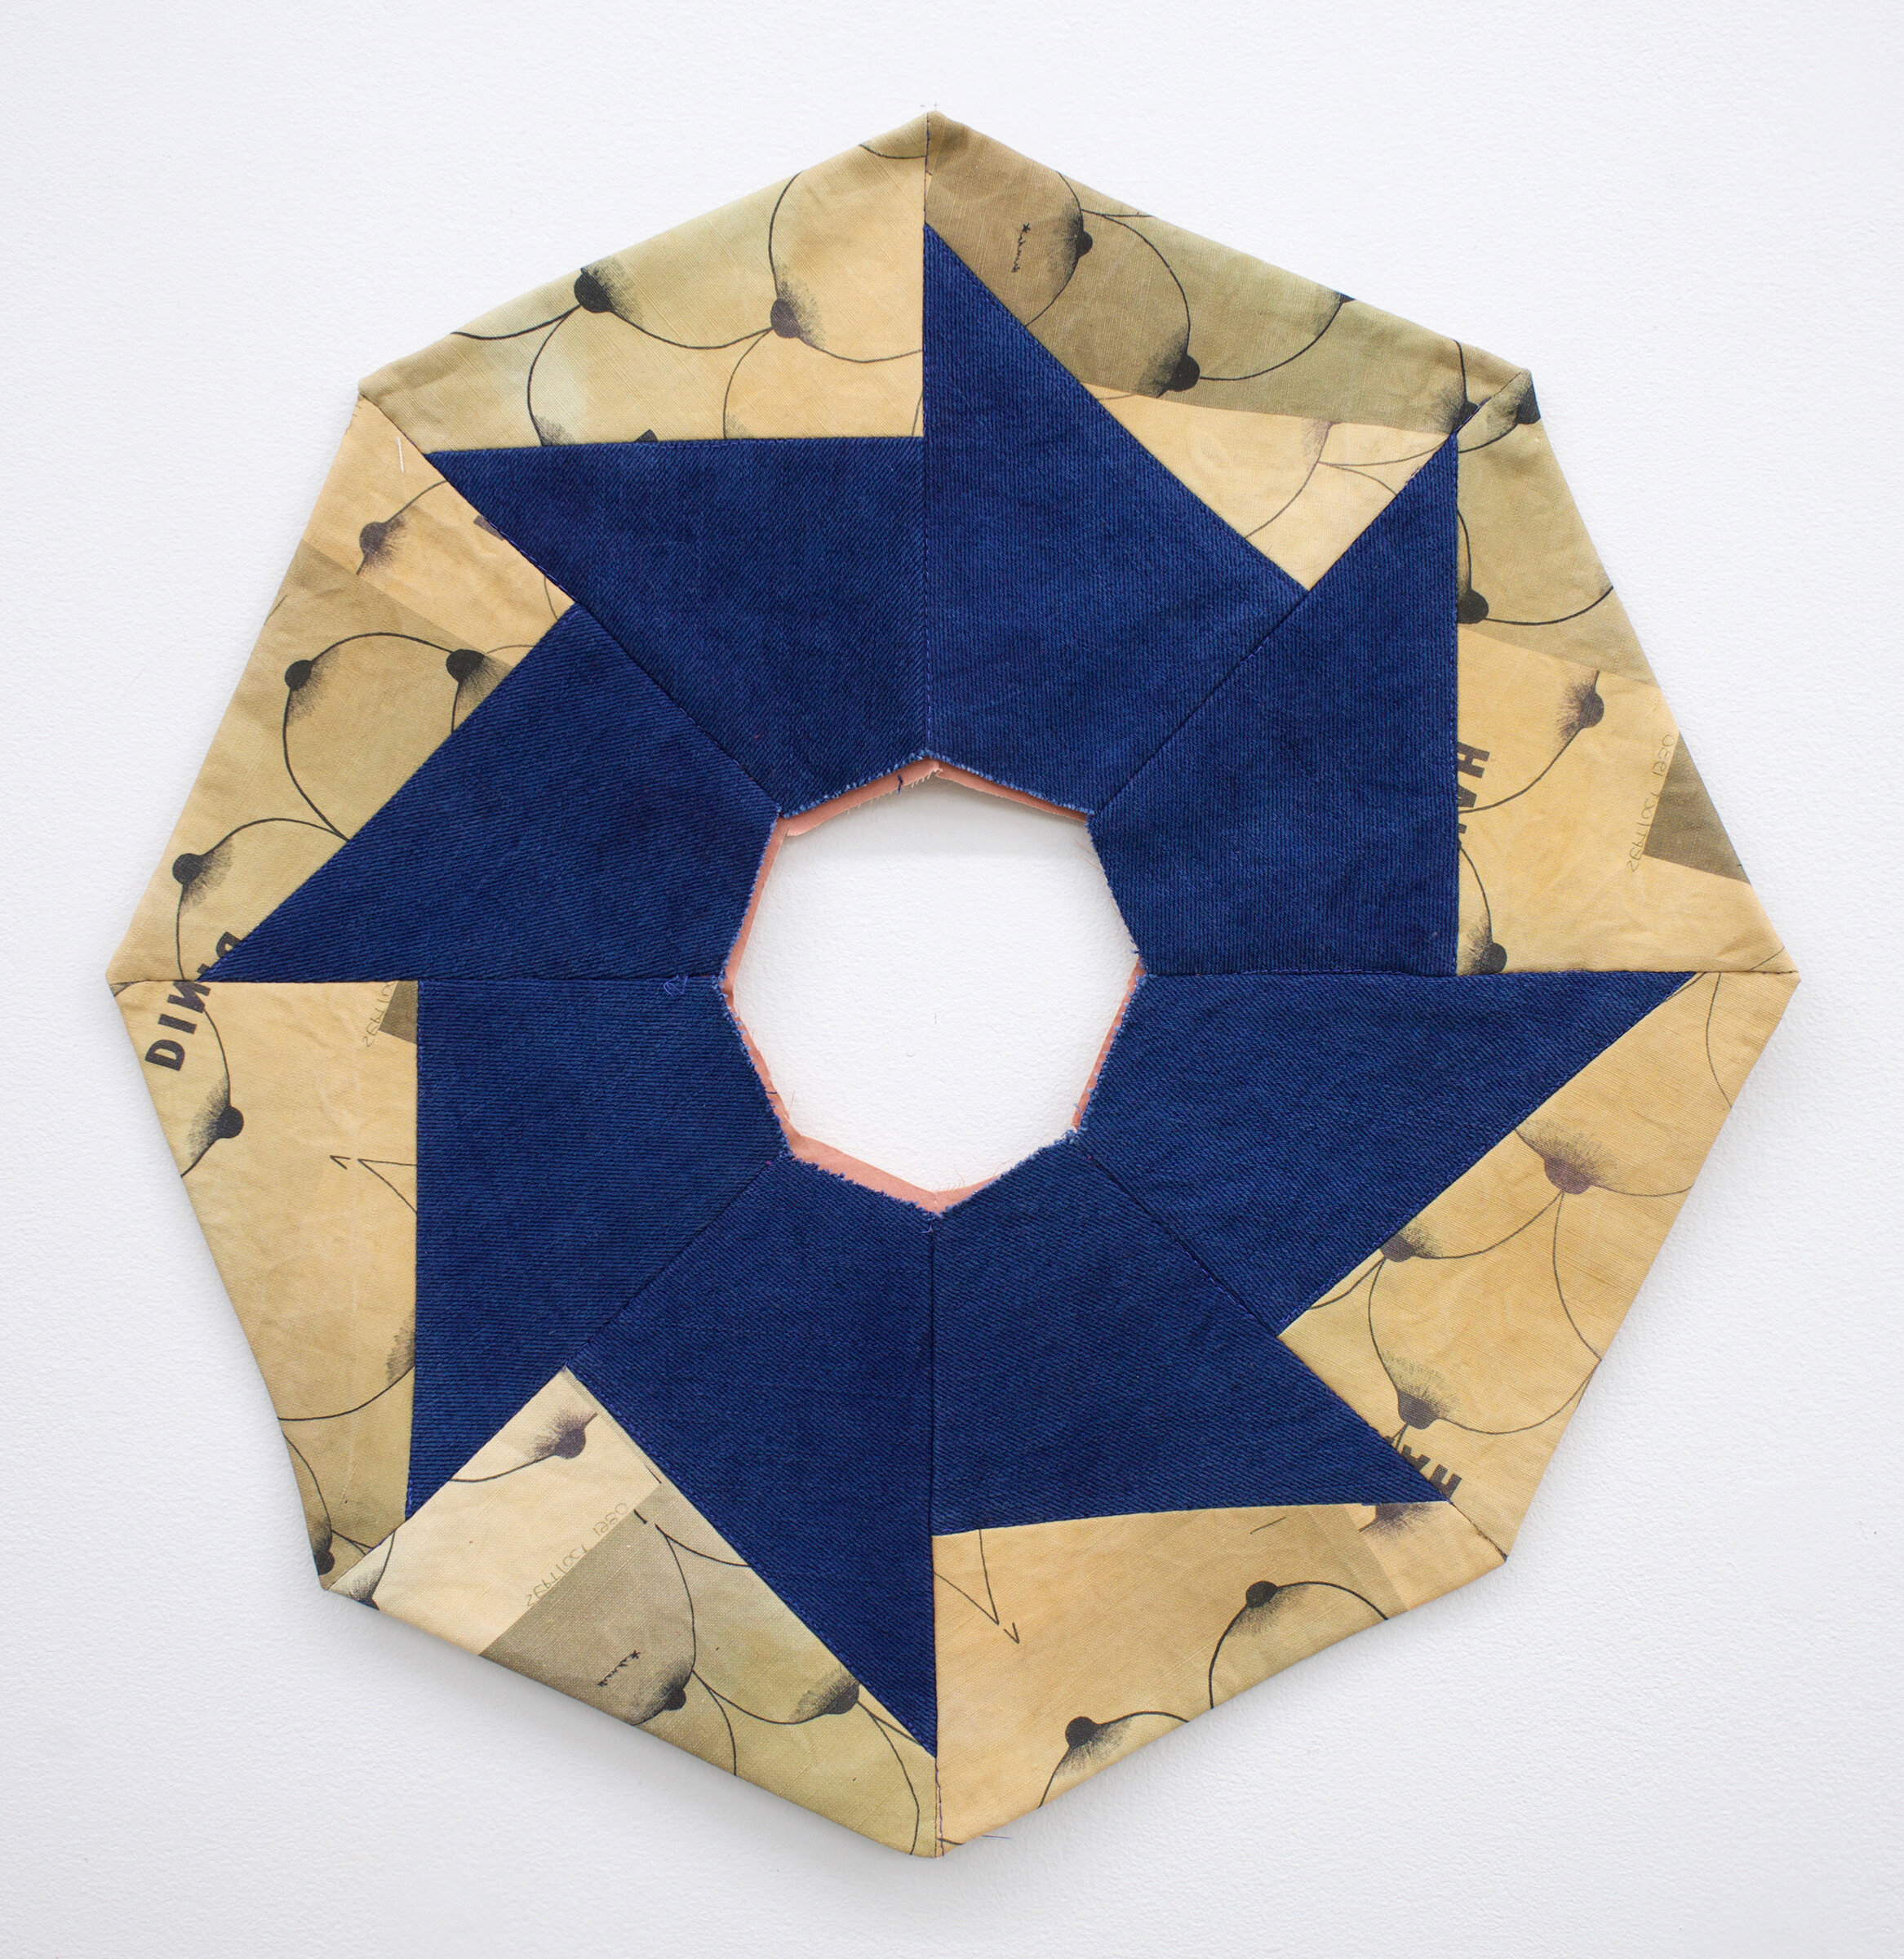  AMANDA CURRERI  Sawblades (Dinah*) , 2021 Weld and madder dye on silk and screen printed acrylic on synthetic dyed denim, 18” x 18”    